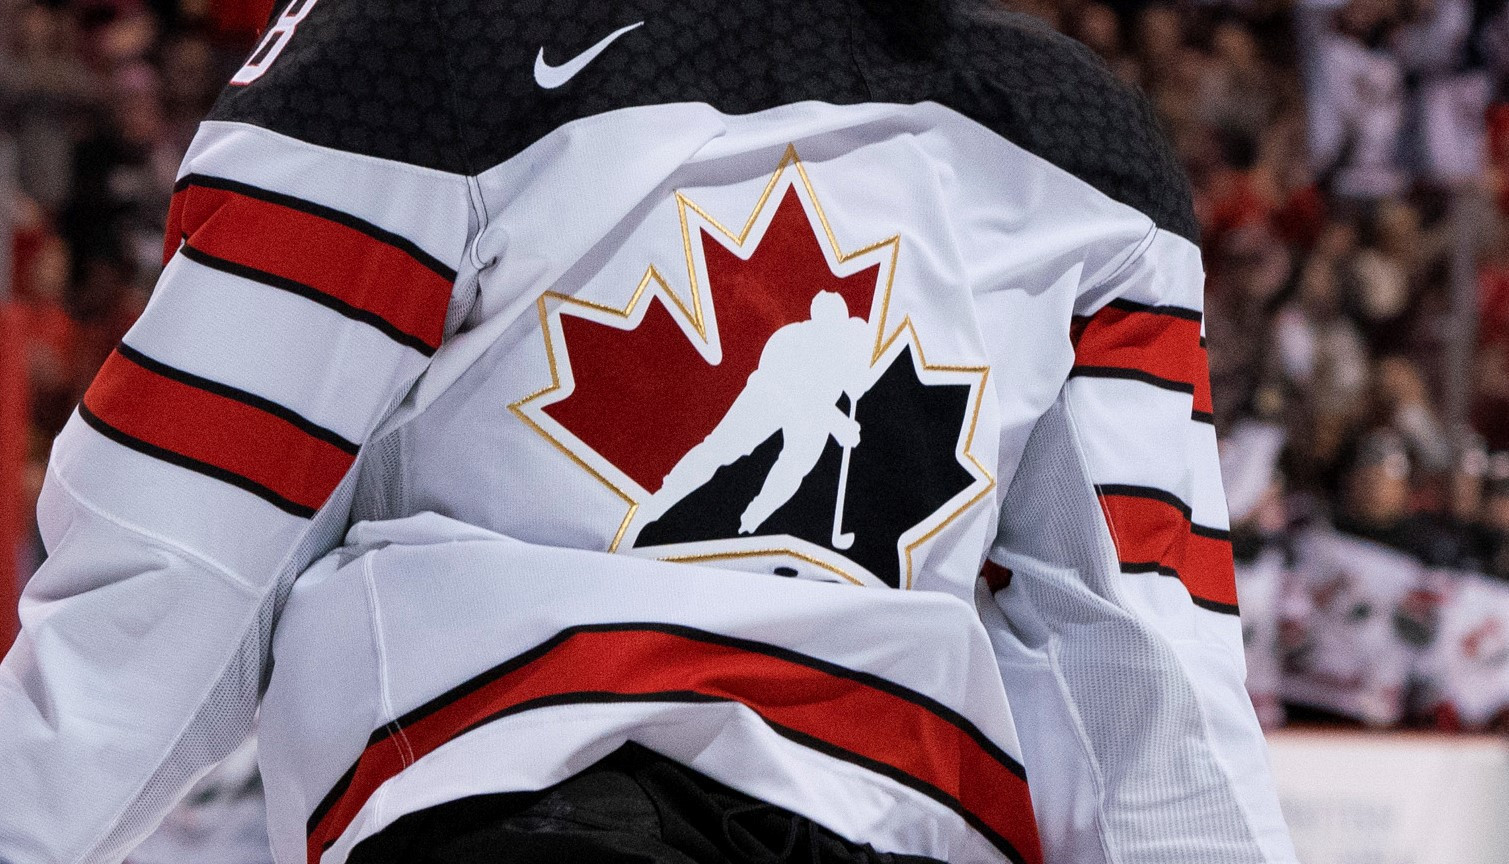 Police investigate two alleged sexual assaults as Hockey Canada scandal deepens